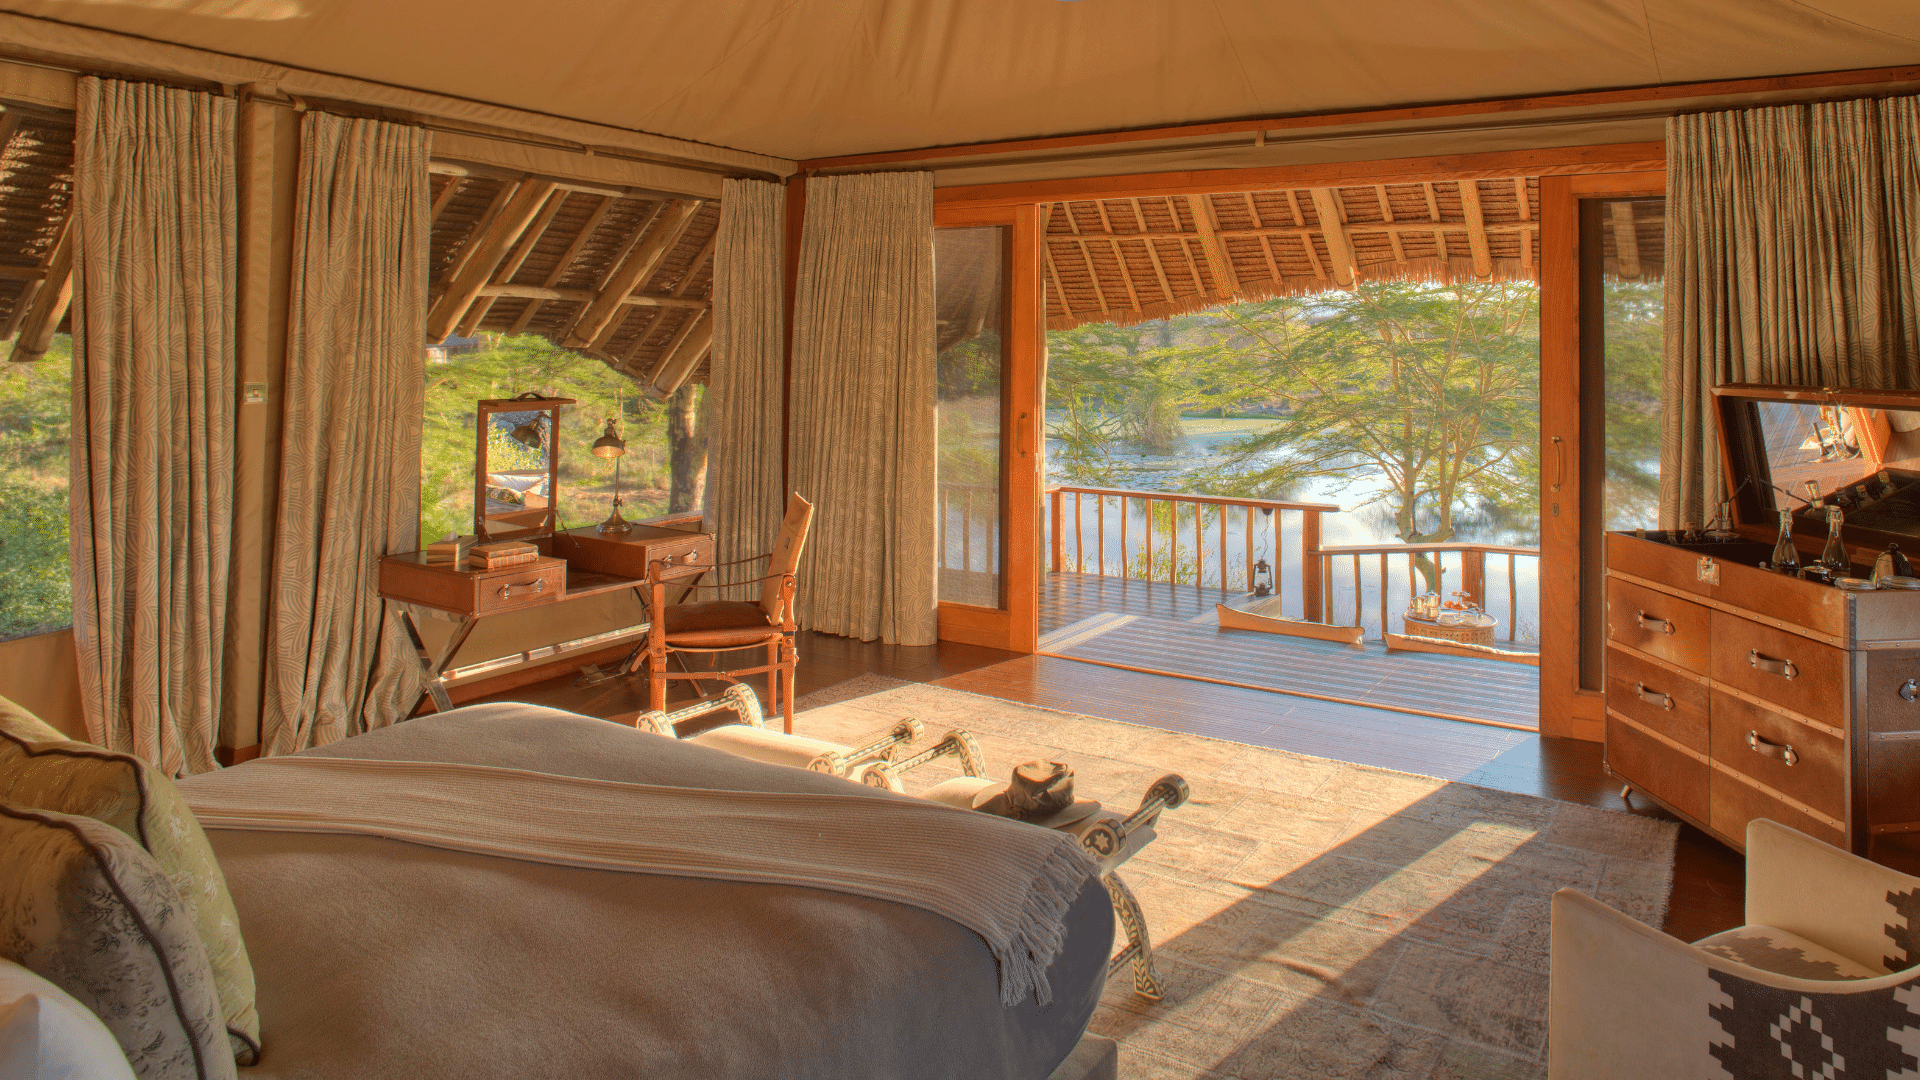 Our luxury tented camp offers 5-star tented accomodation